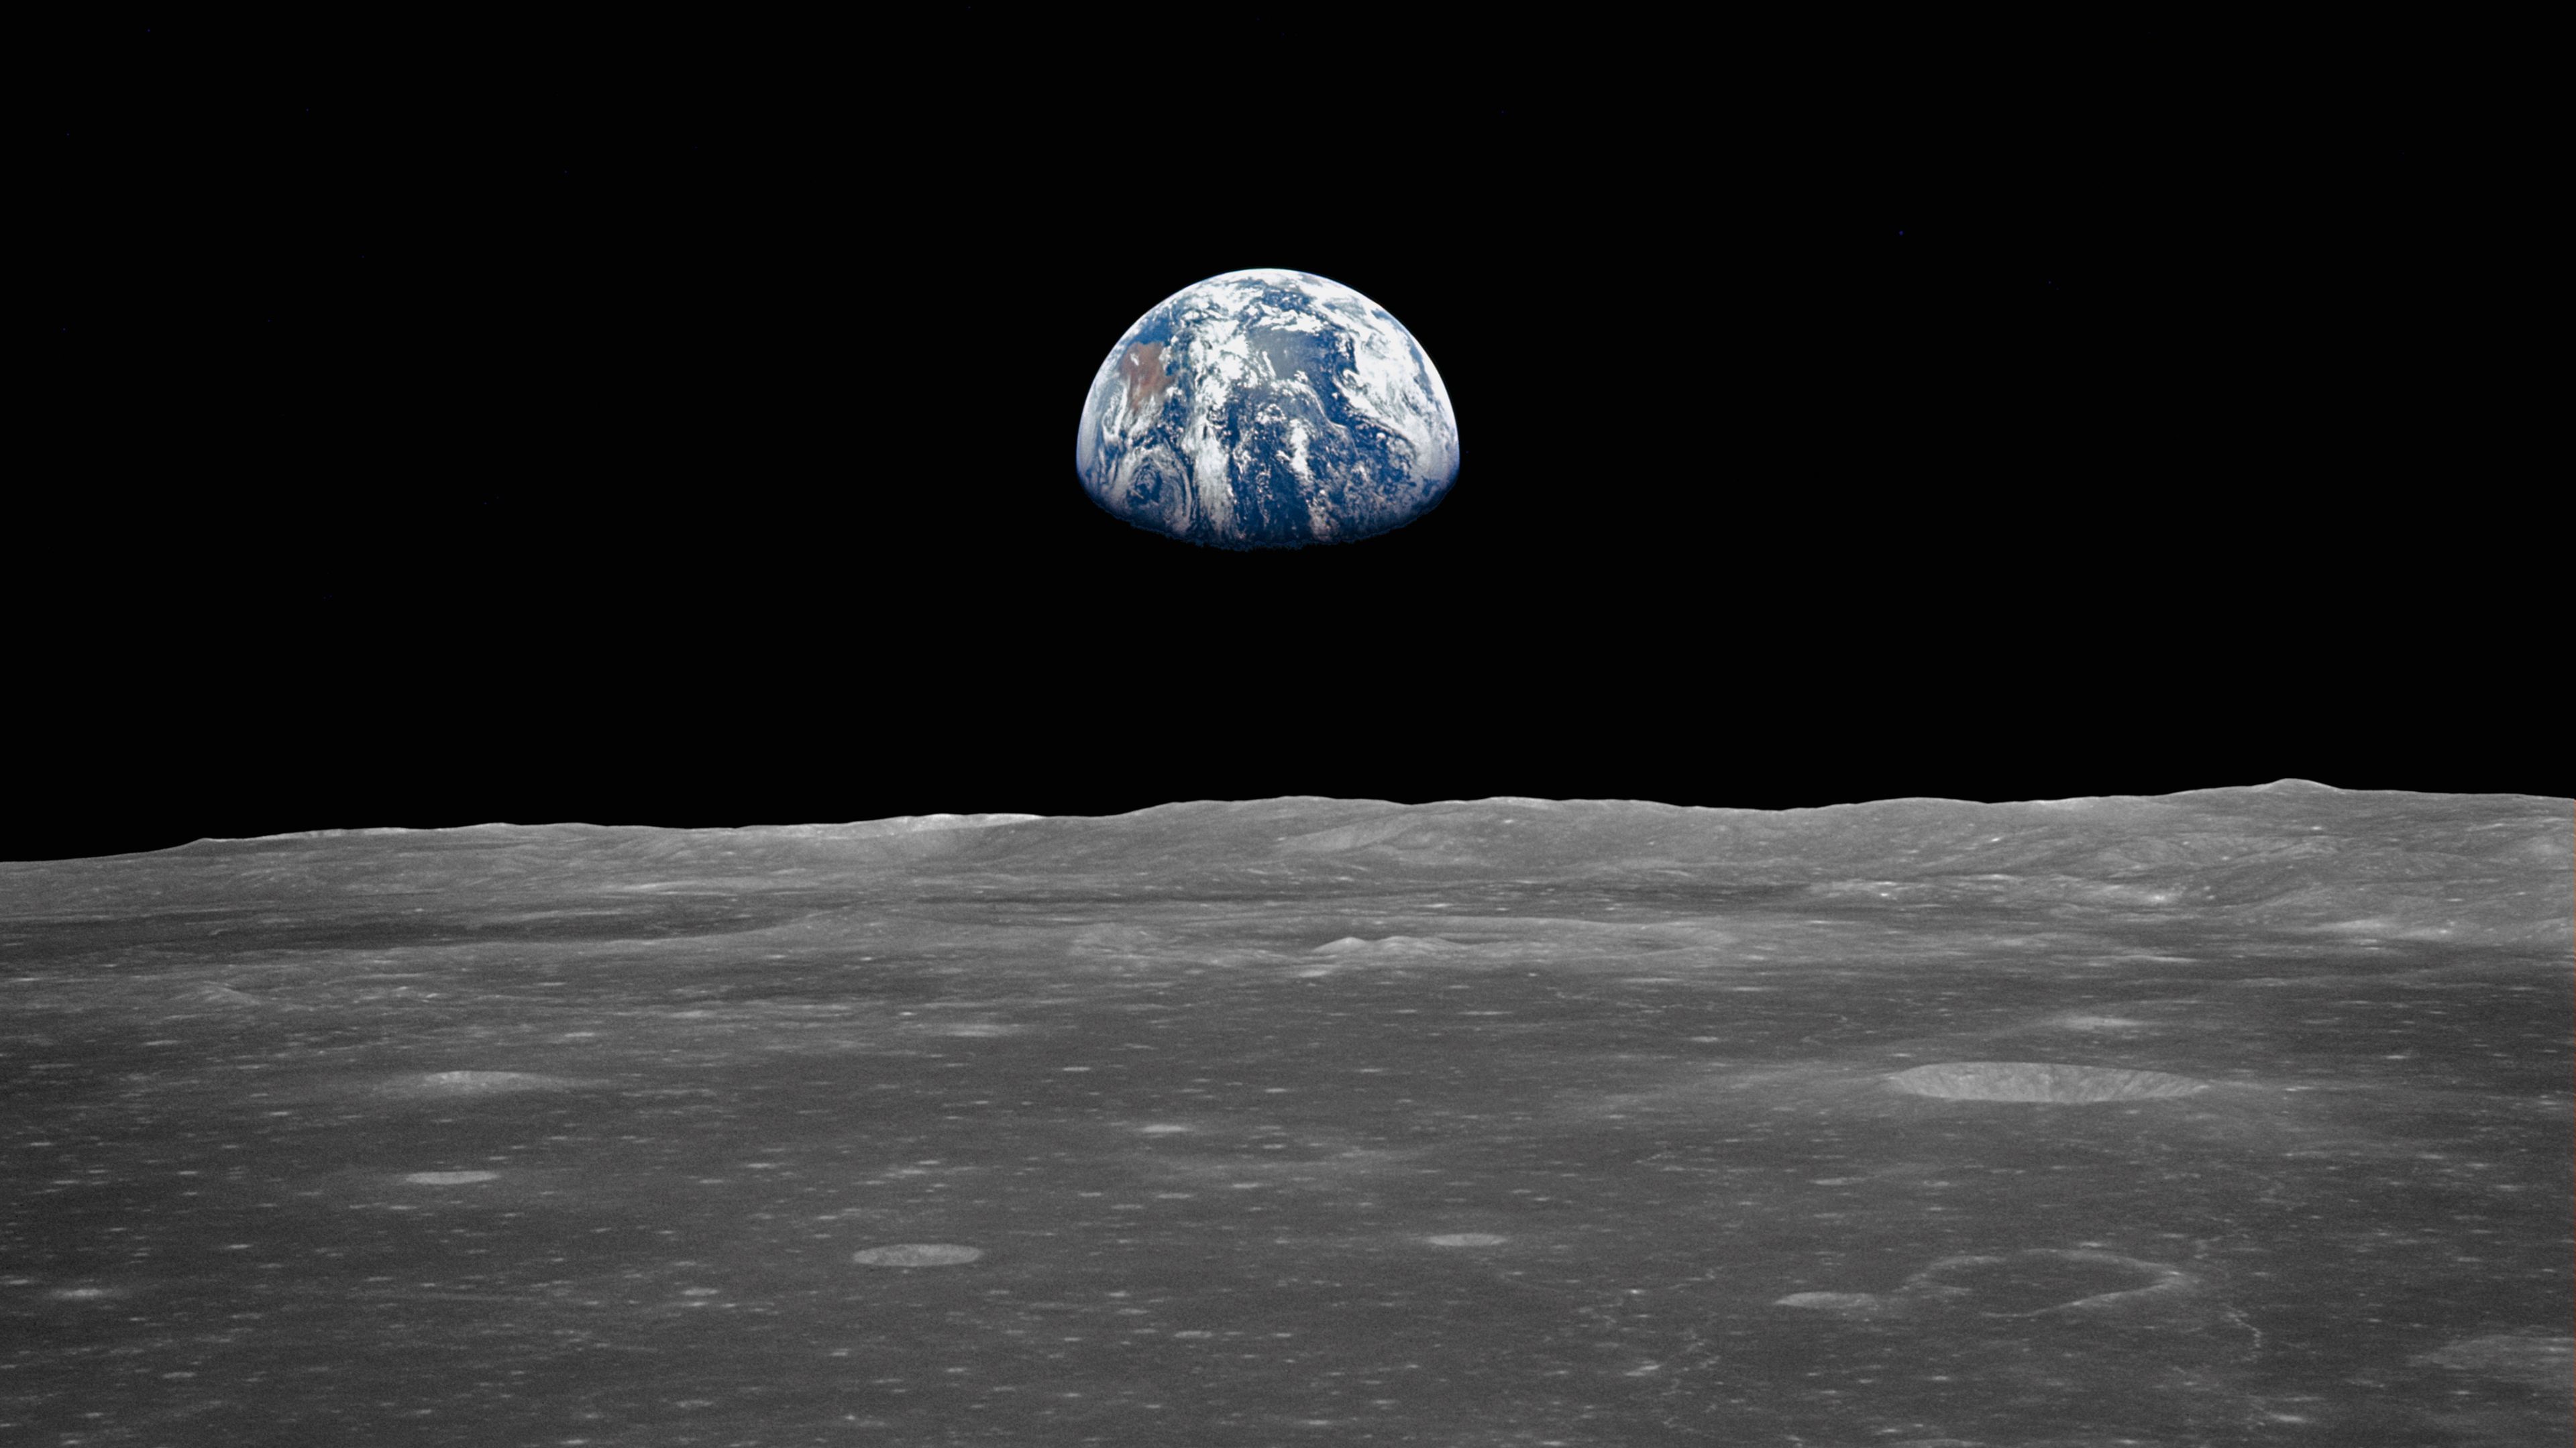 View of the earth from the moon